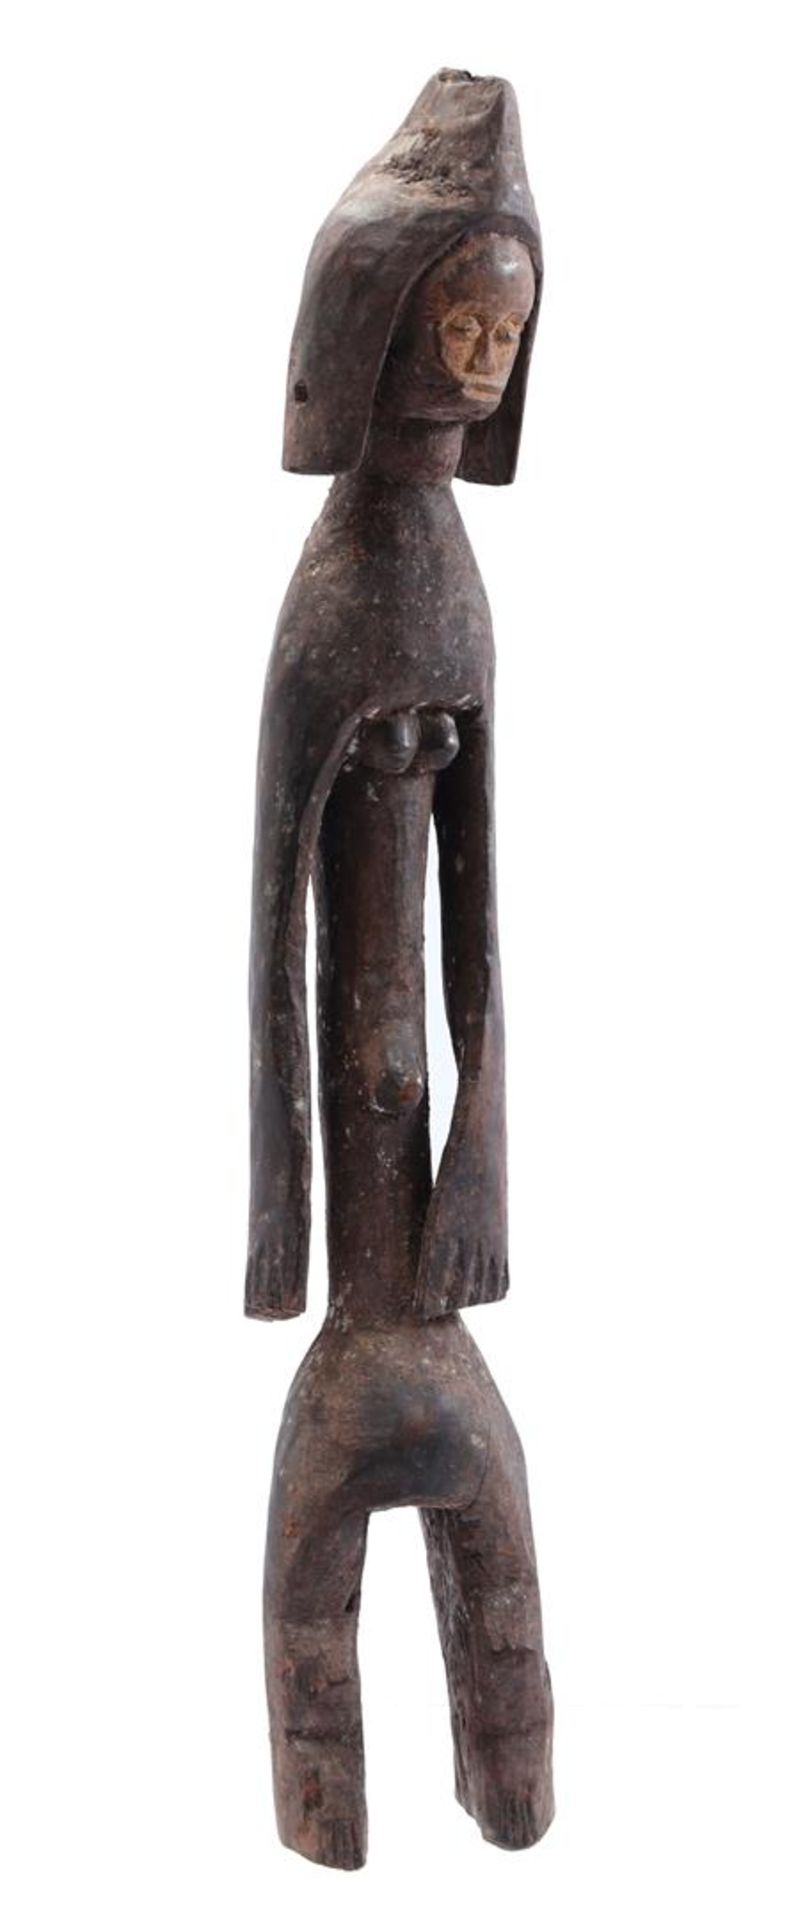 Wooden ceremonial statue of a woman